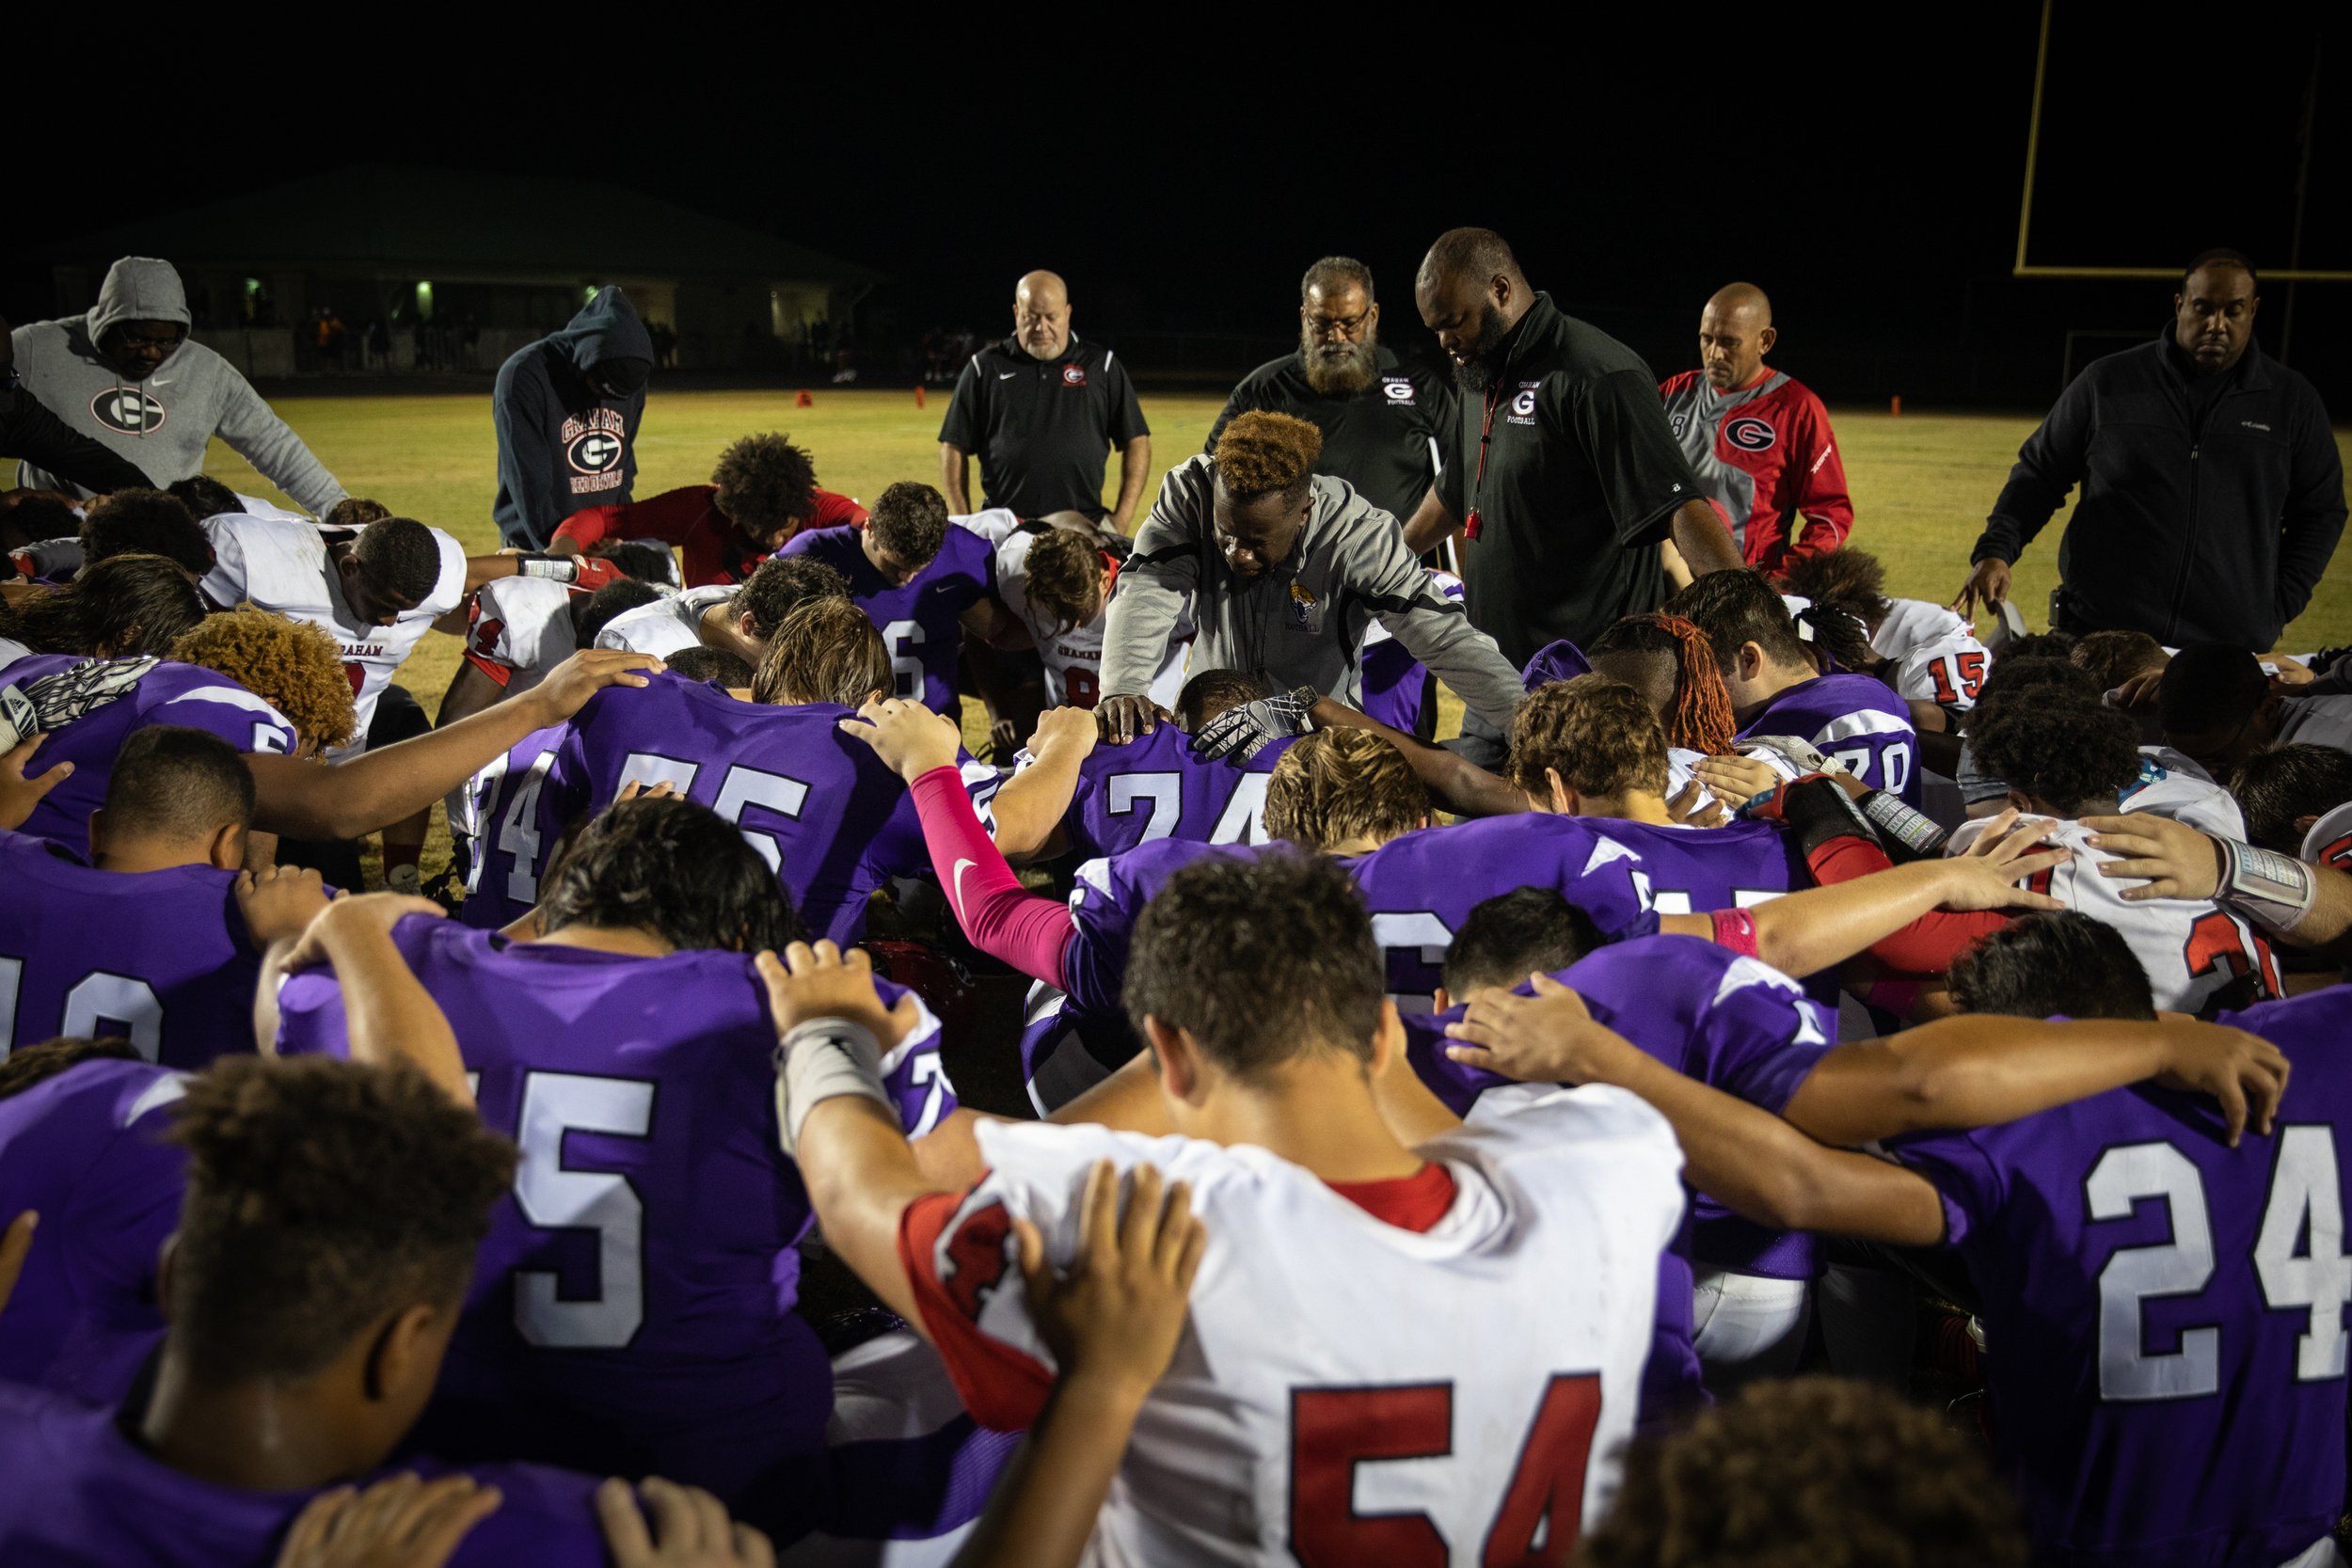  Coach Lathan leads a prayer with players from both football teams after Carrboro beat Graham High School, 22-0. “I have built this program on three simple principles... God before all, team before me, and be the best that I can be,” Lathan said.  “I